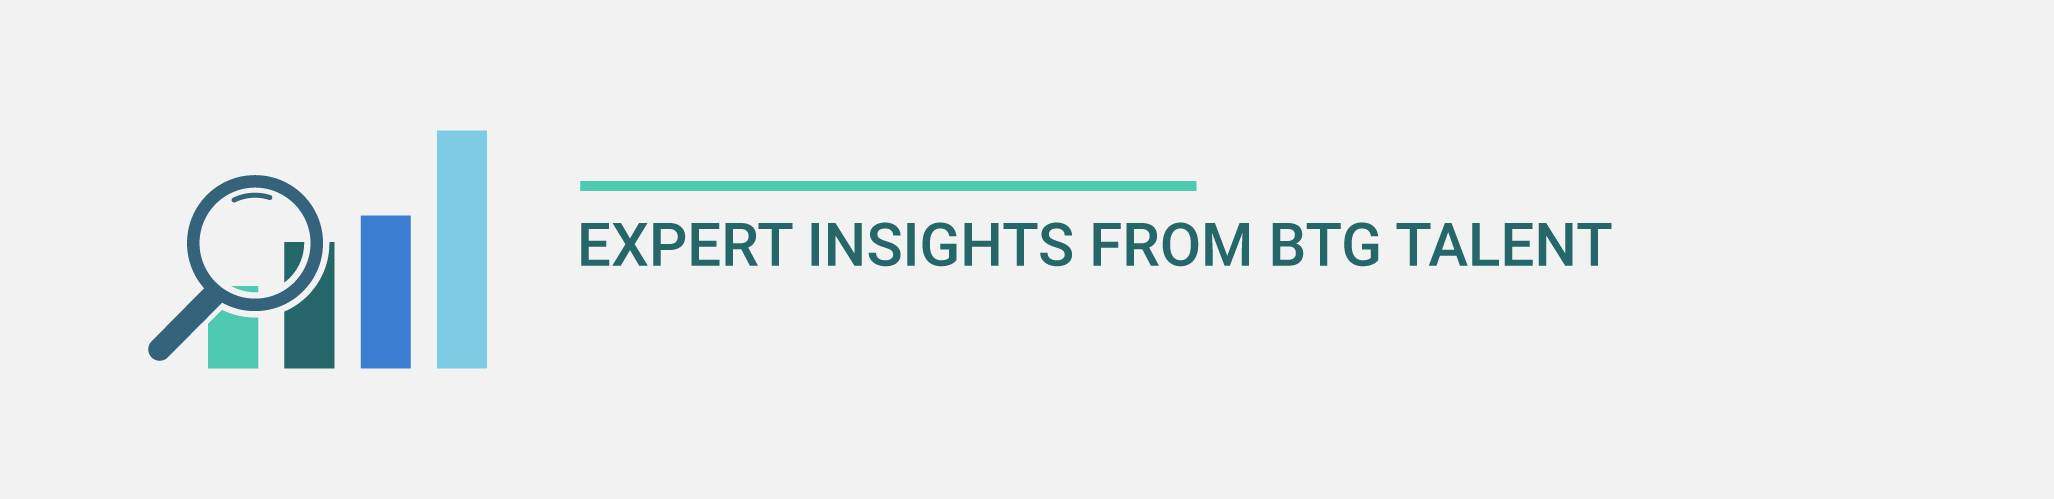 Icon of a bar chart with magnifying glass with text "Expert Insights from BTG Talent"